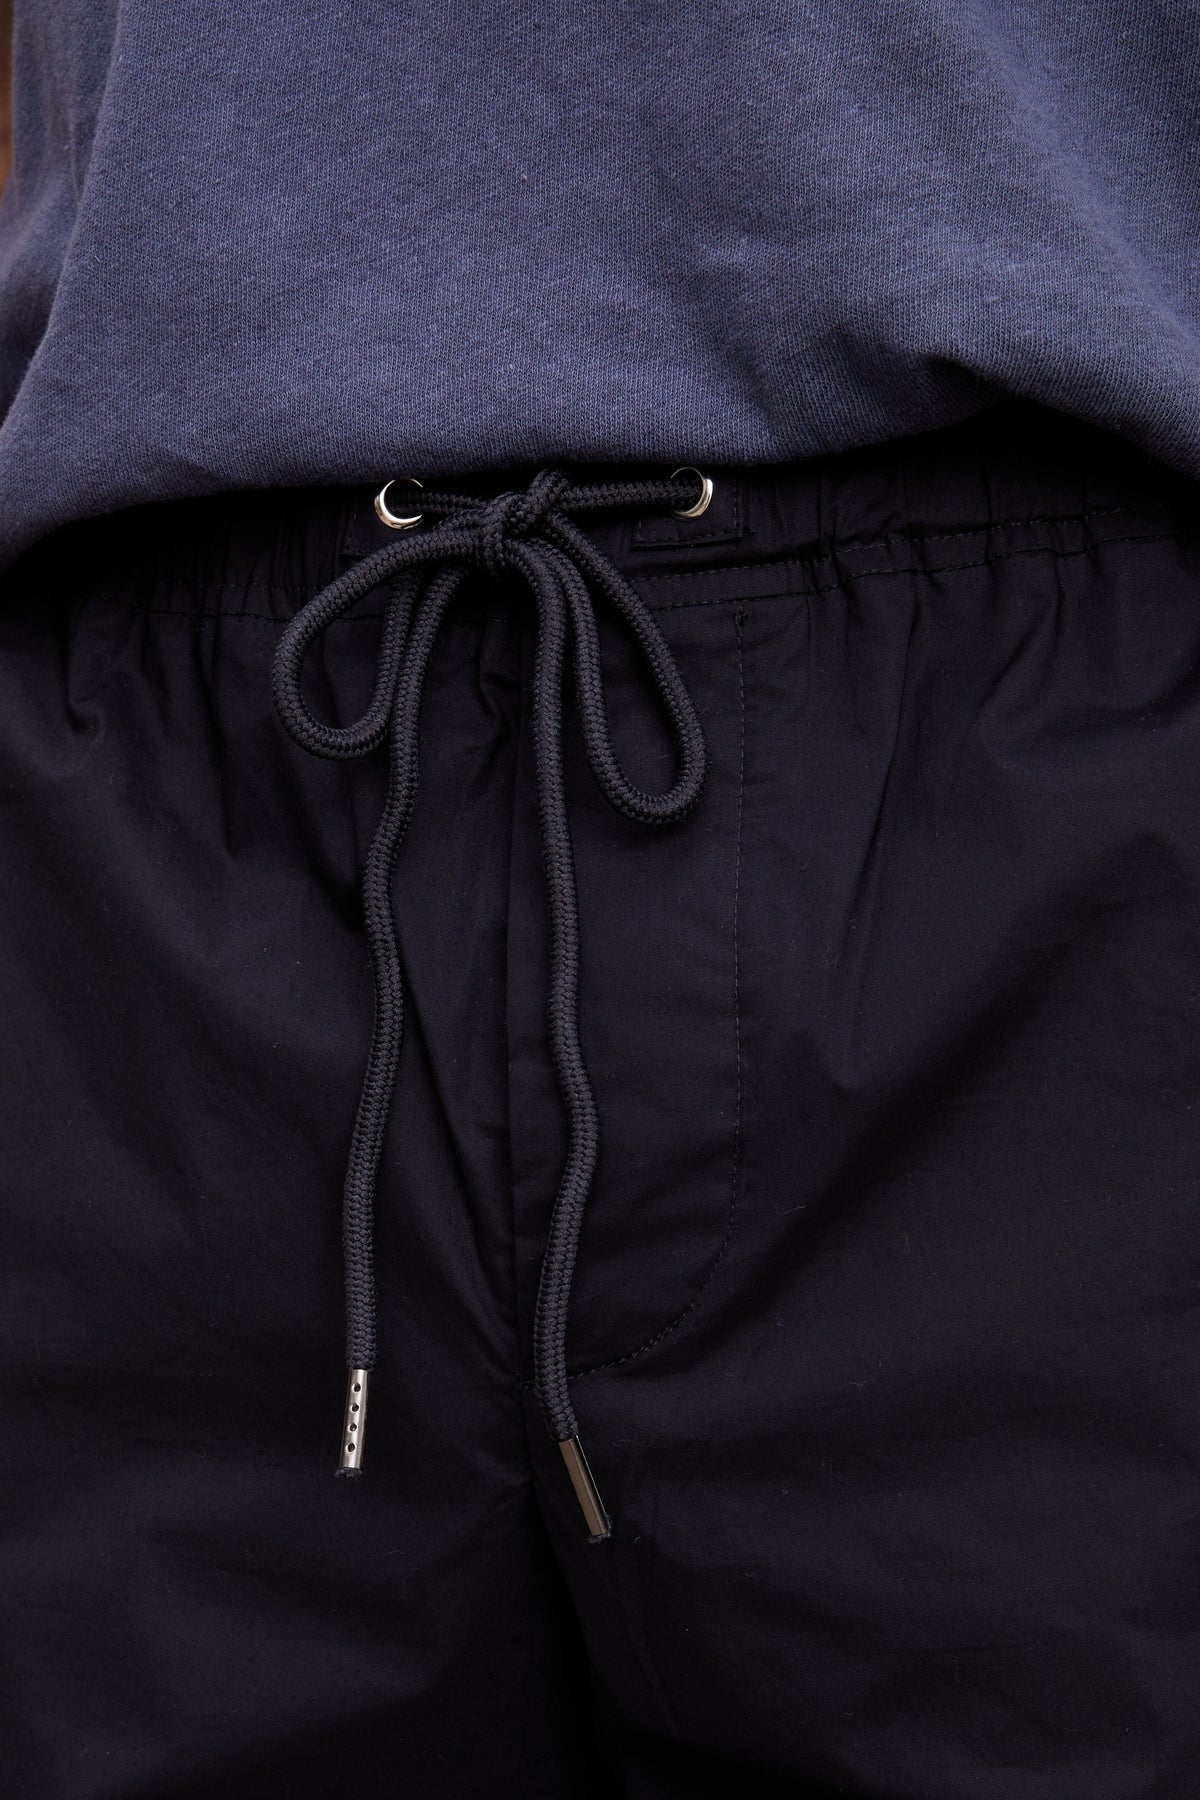 Close-up of a black drawstring with metal aglets on Velvet by Graham & Spencer's LAZARUS JOGGER under a blue sweatshirt.-36732528918721